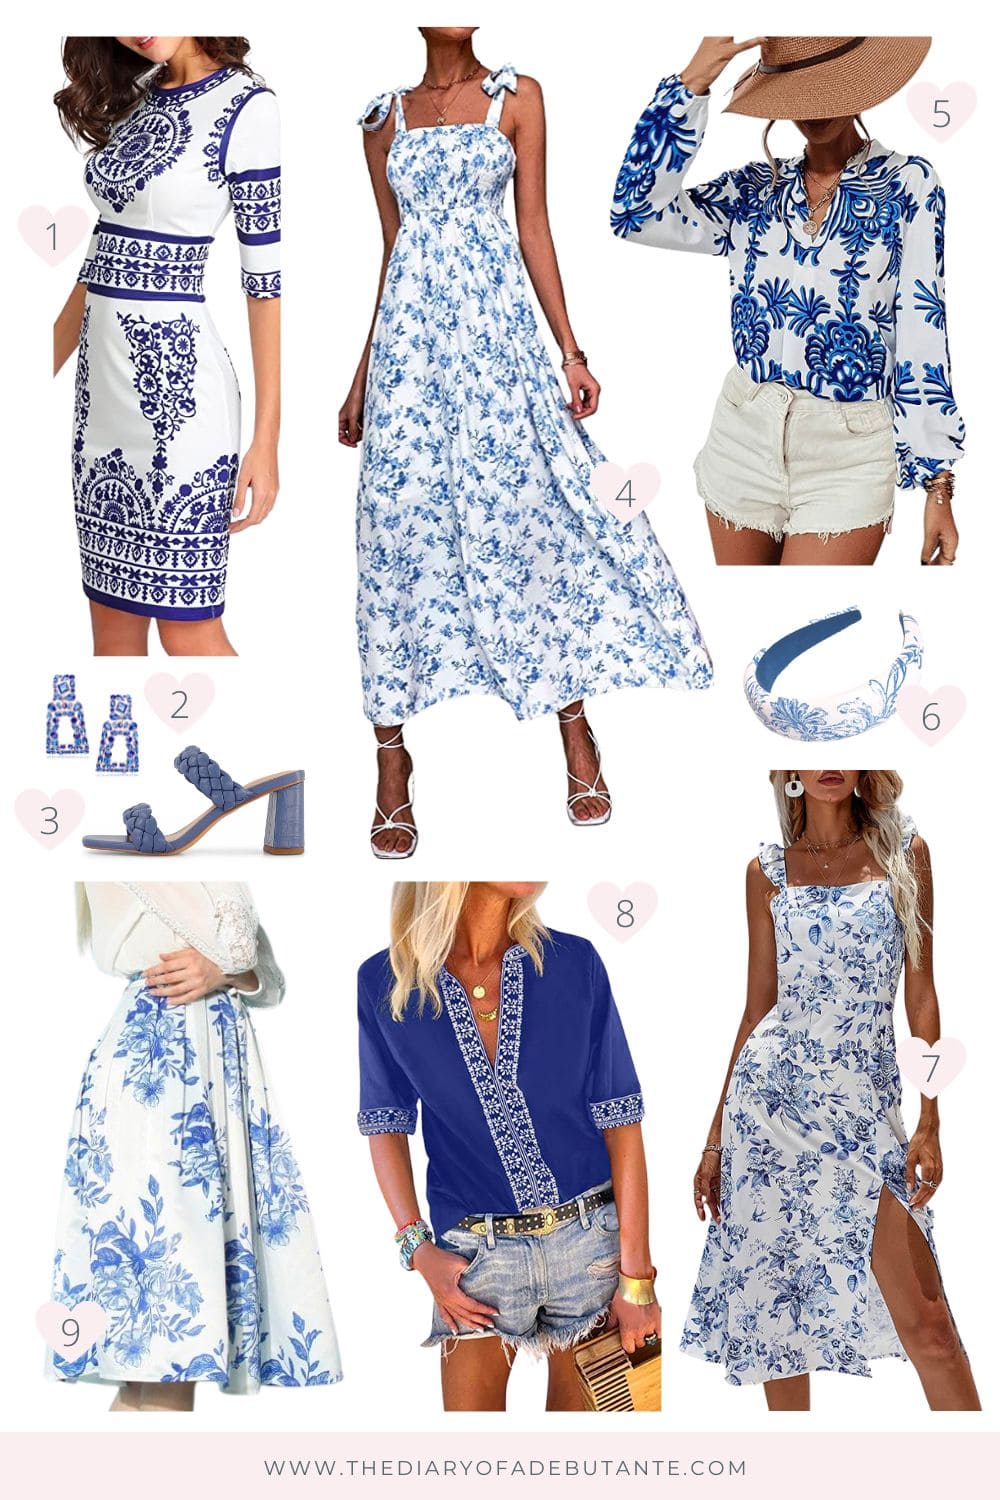 Affordable fashion blogger Stephanie Ziajka rounds up 9 of her favorite blue and white dresses and Chinoiserie style finds from Amazon under $50 on Diary of a Debutante